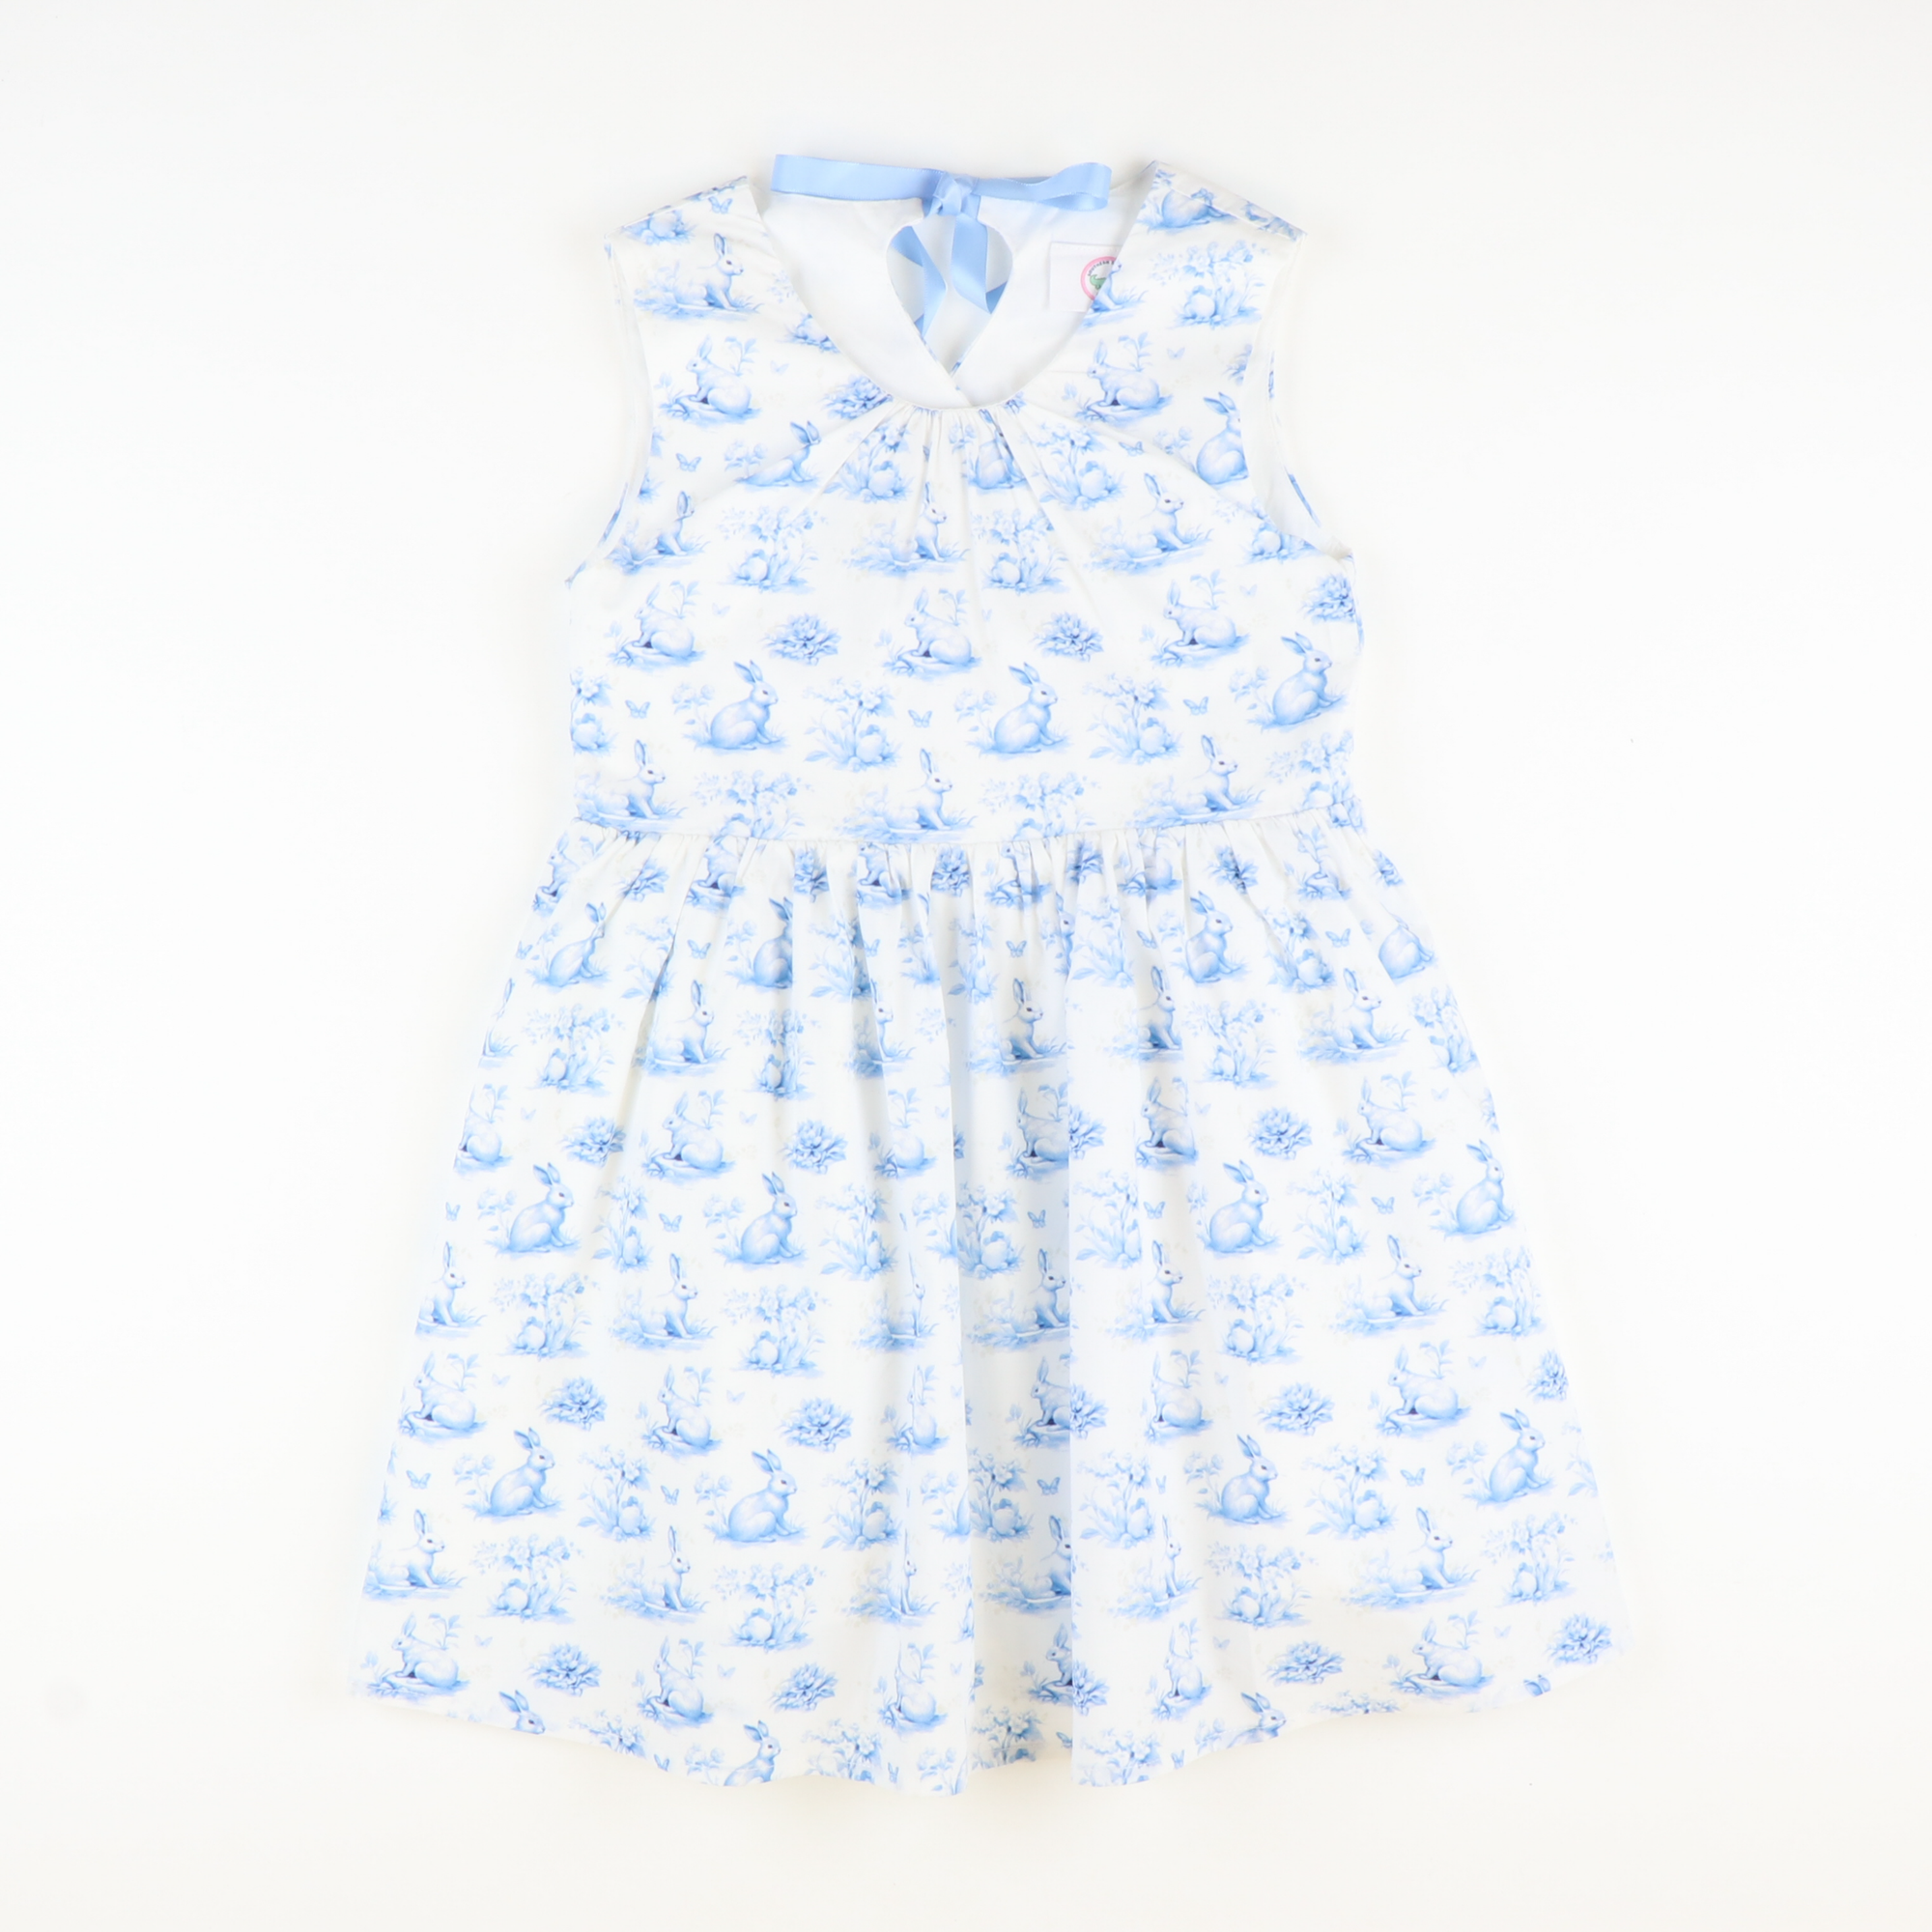 Blue Bunny Toile Dress - Stellybelly